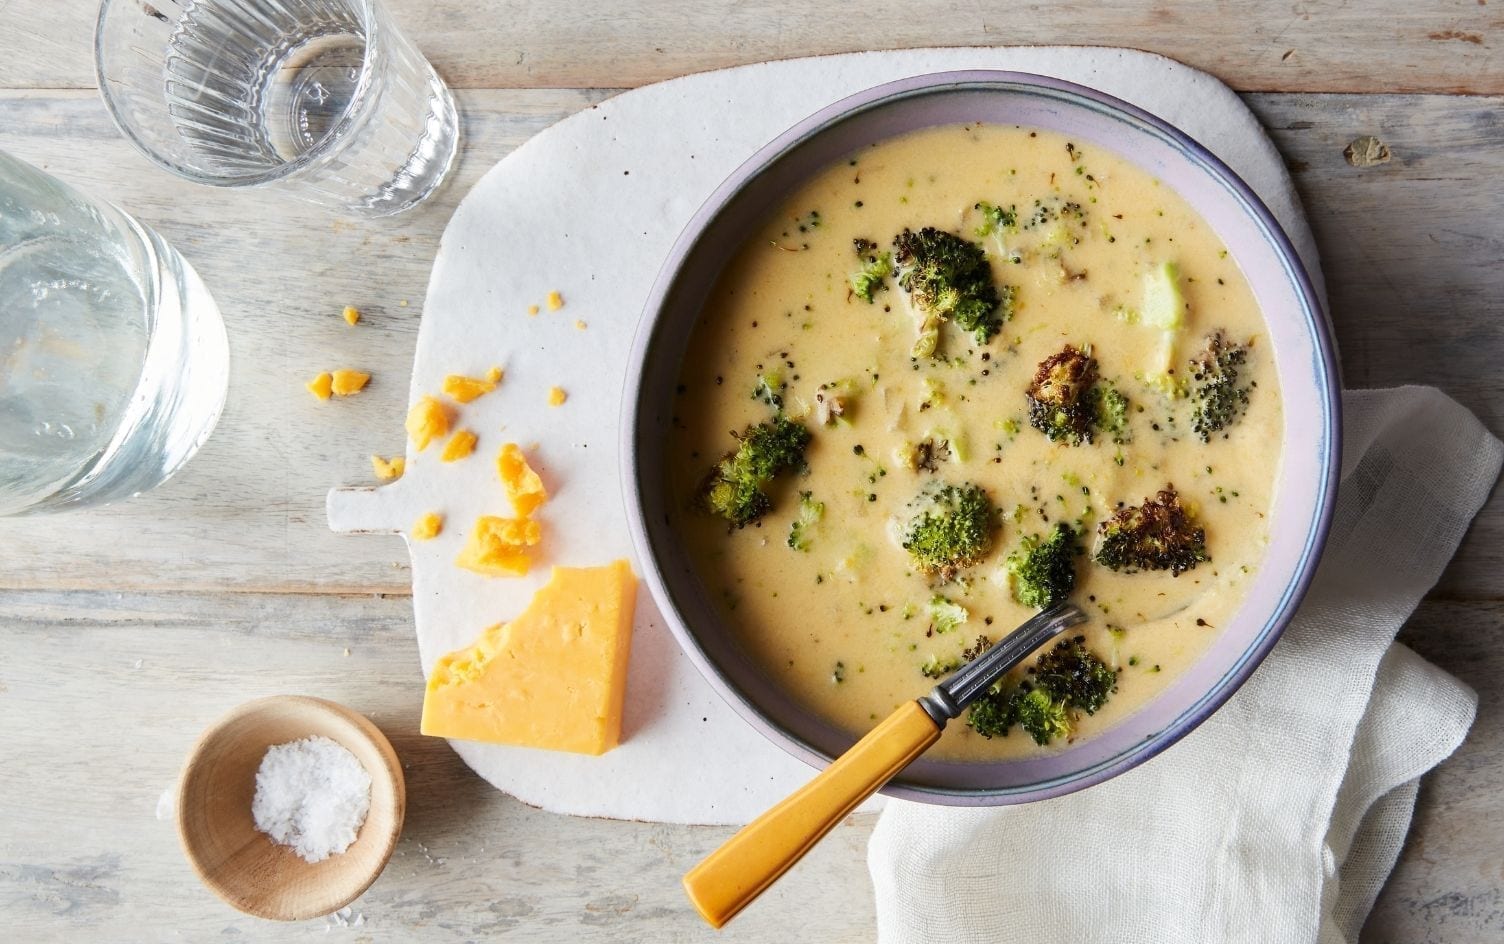 Roasted Broccoli-Cheese Soup